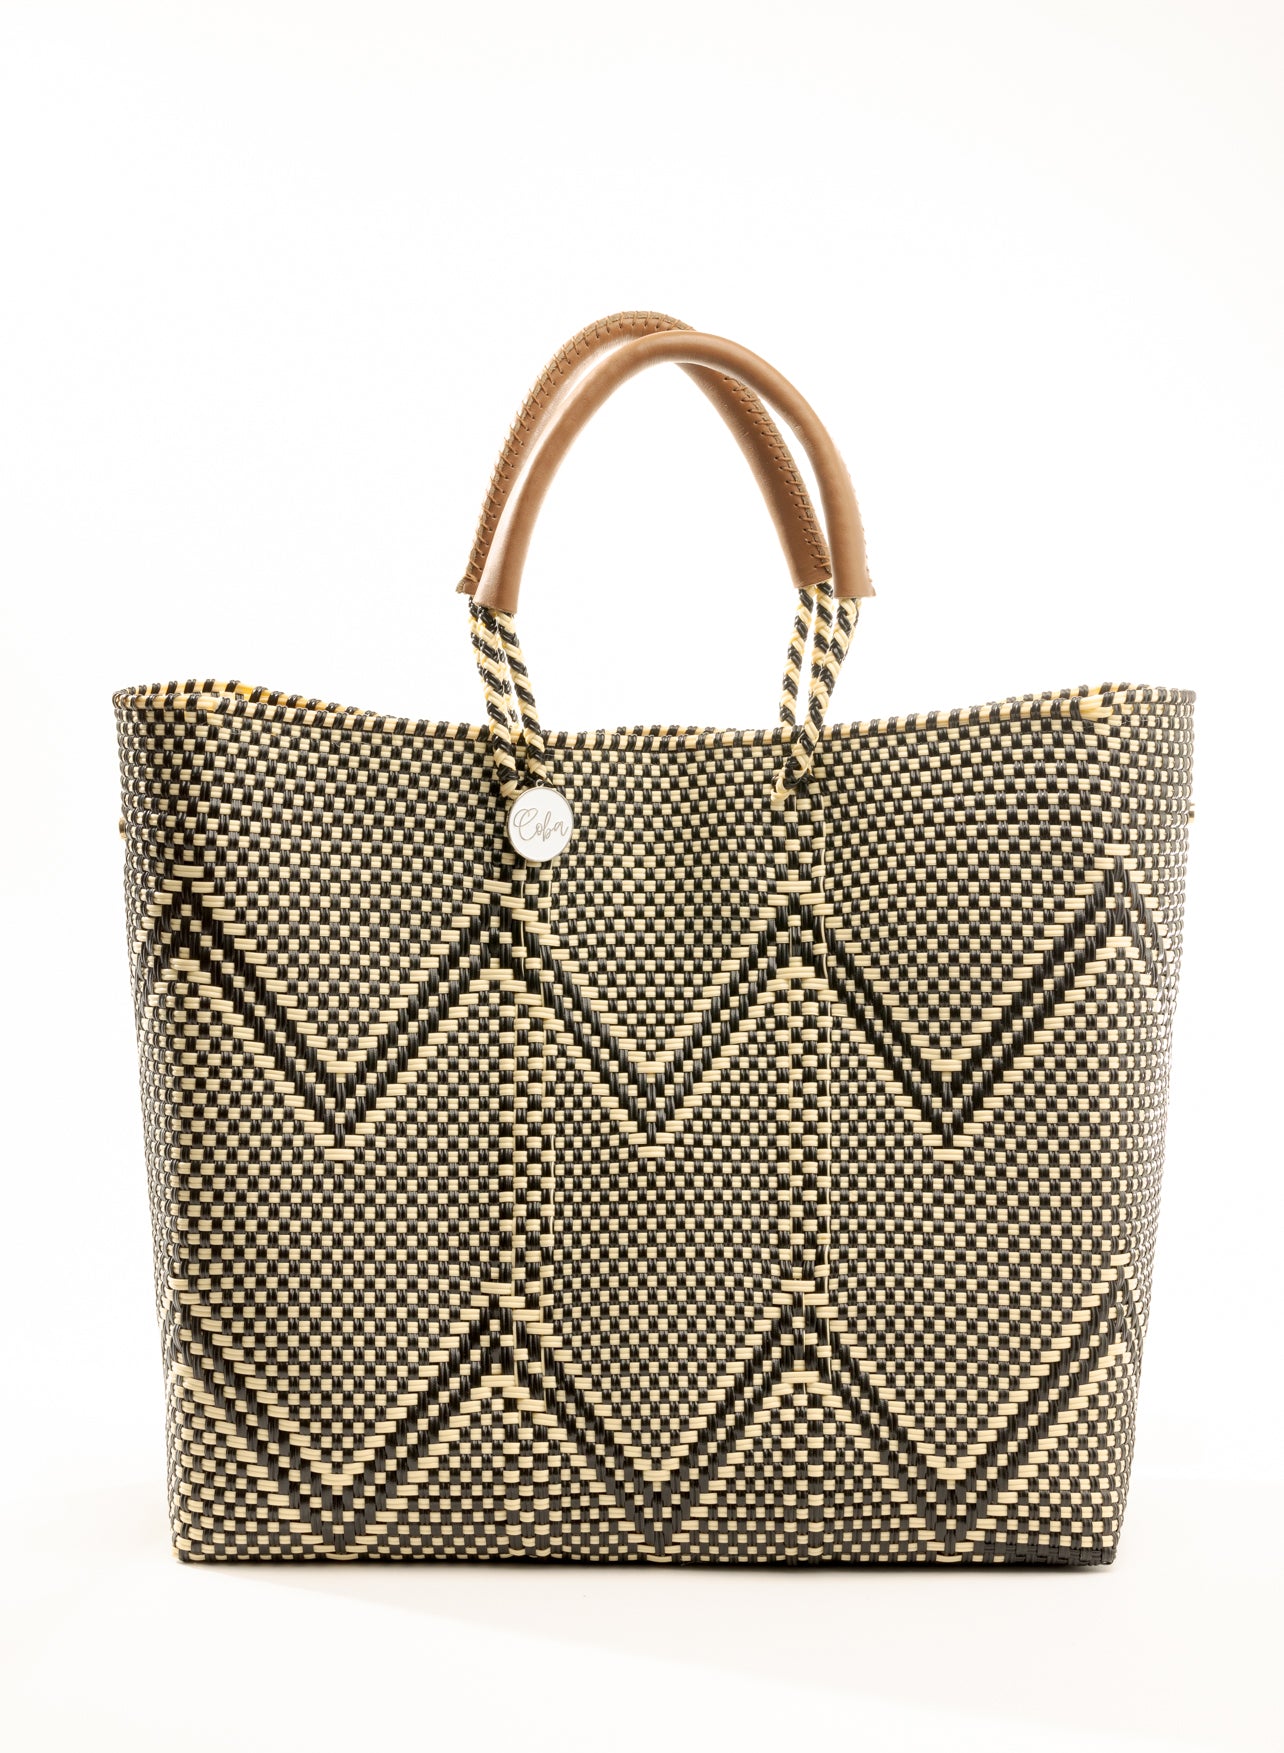 Tan, cream, and brown chevron tote bag made from recycled plastics featuring a tan leather handle and silver Coba medallion detail